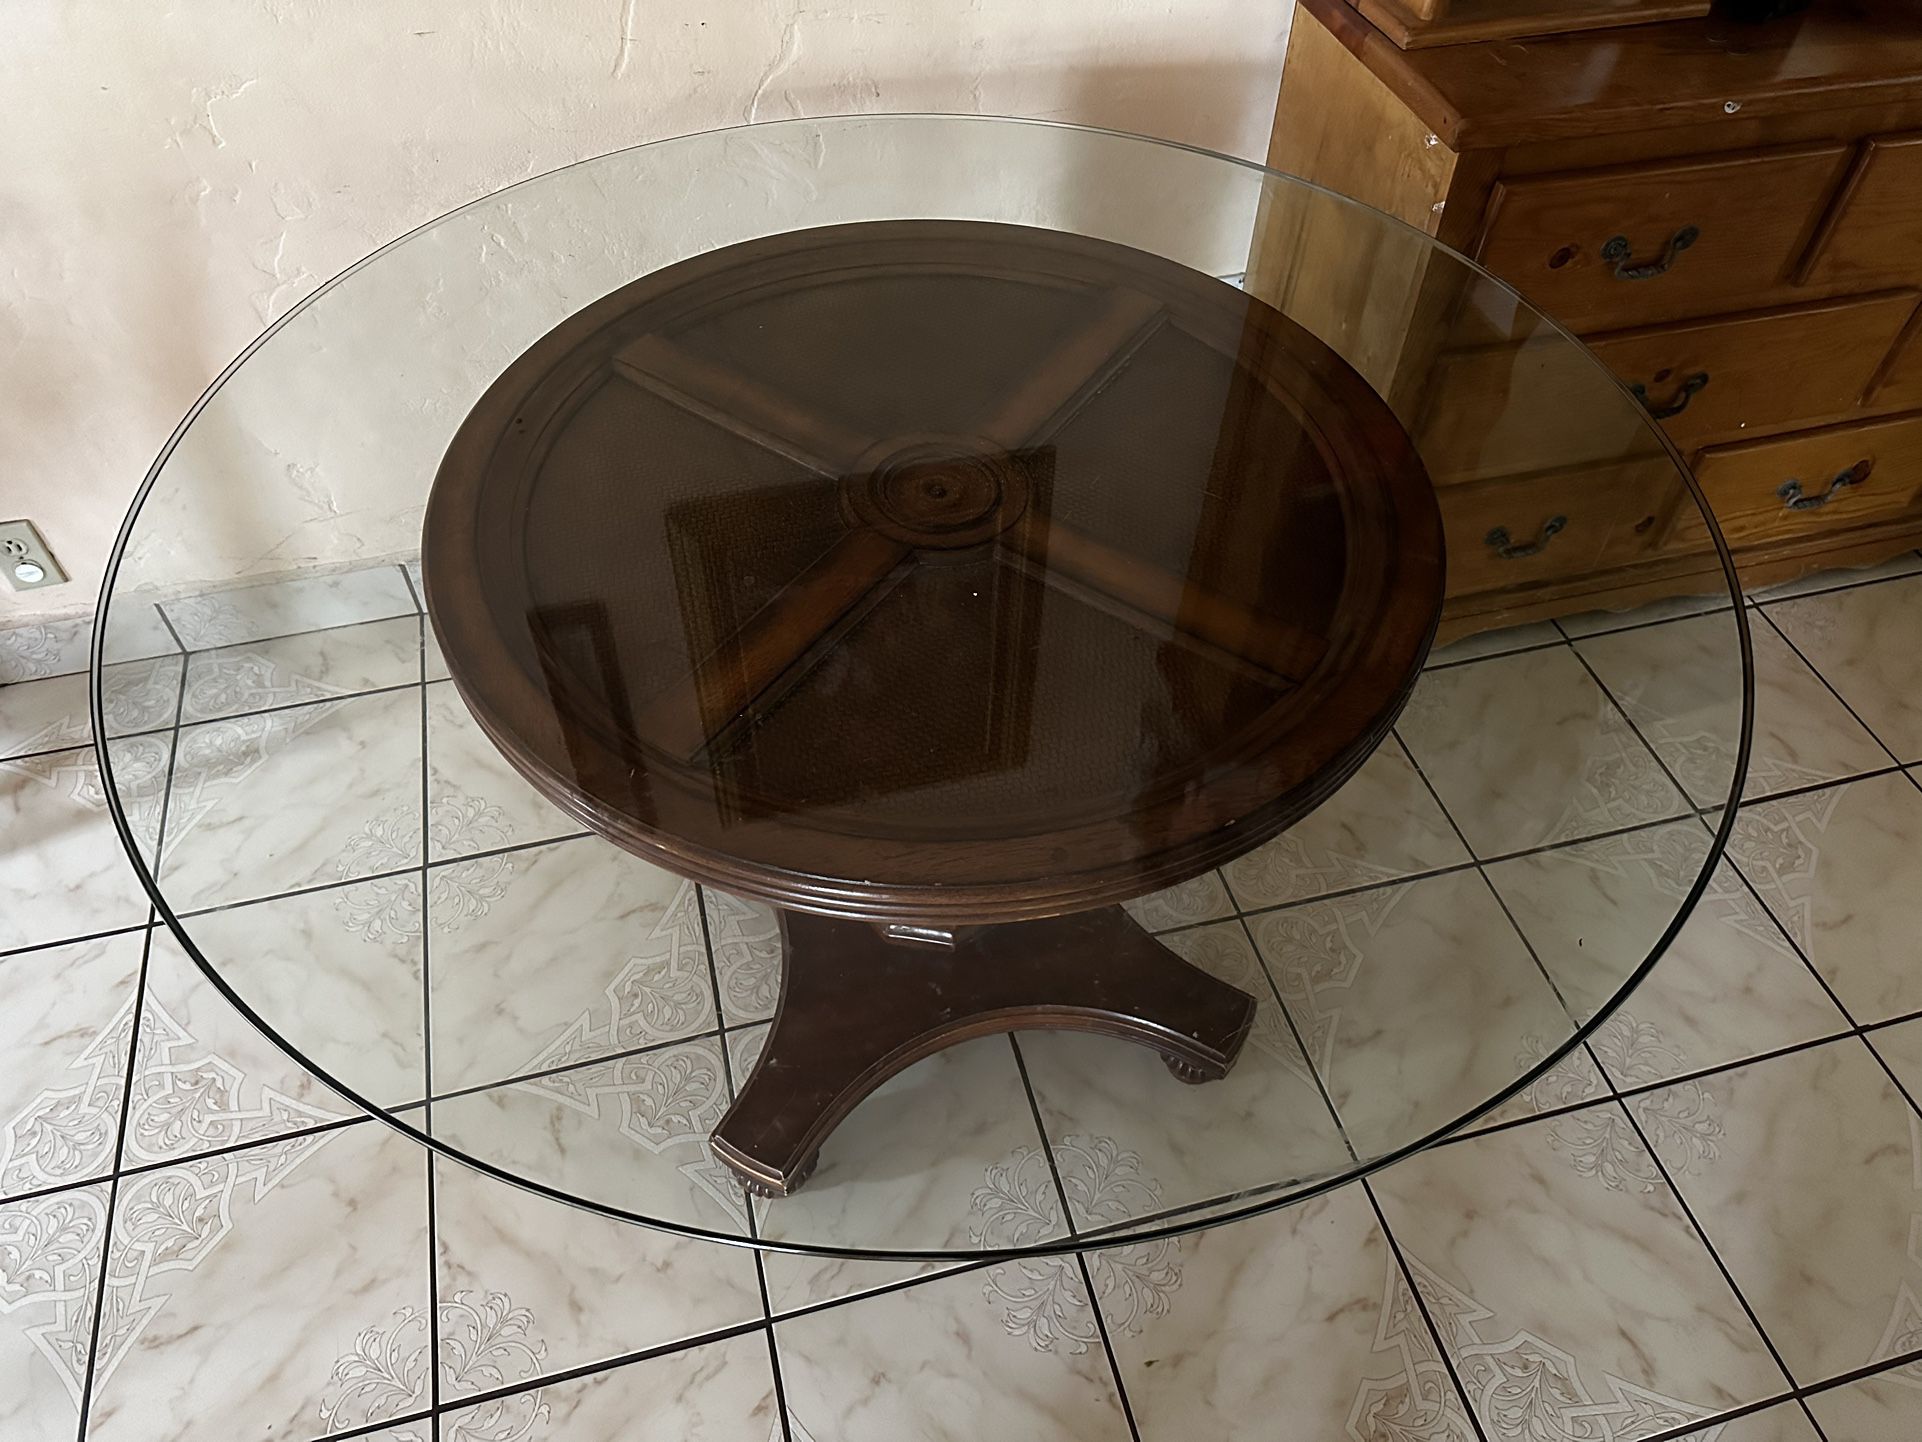 Glass Top Dining Room Table